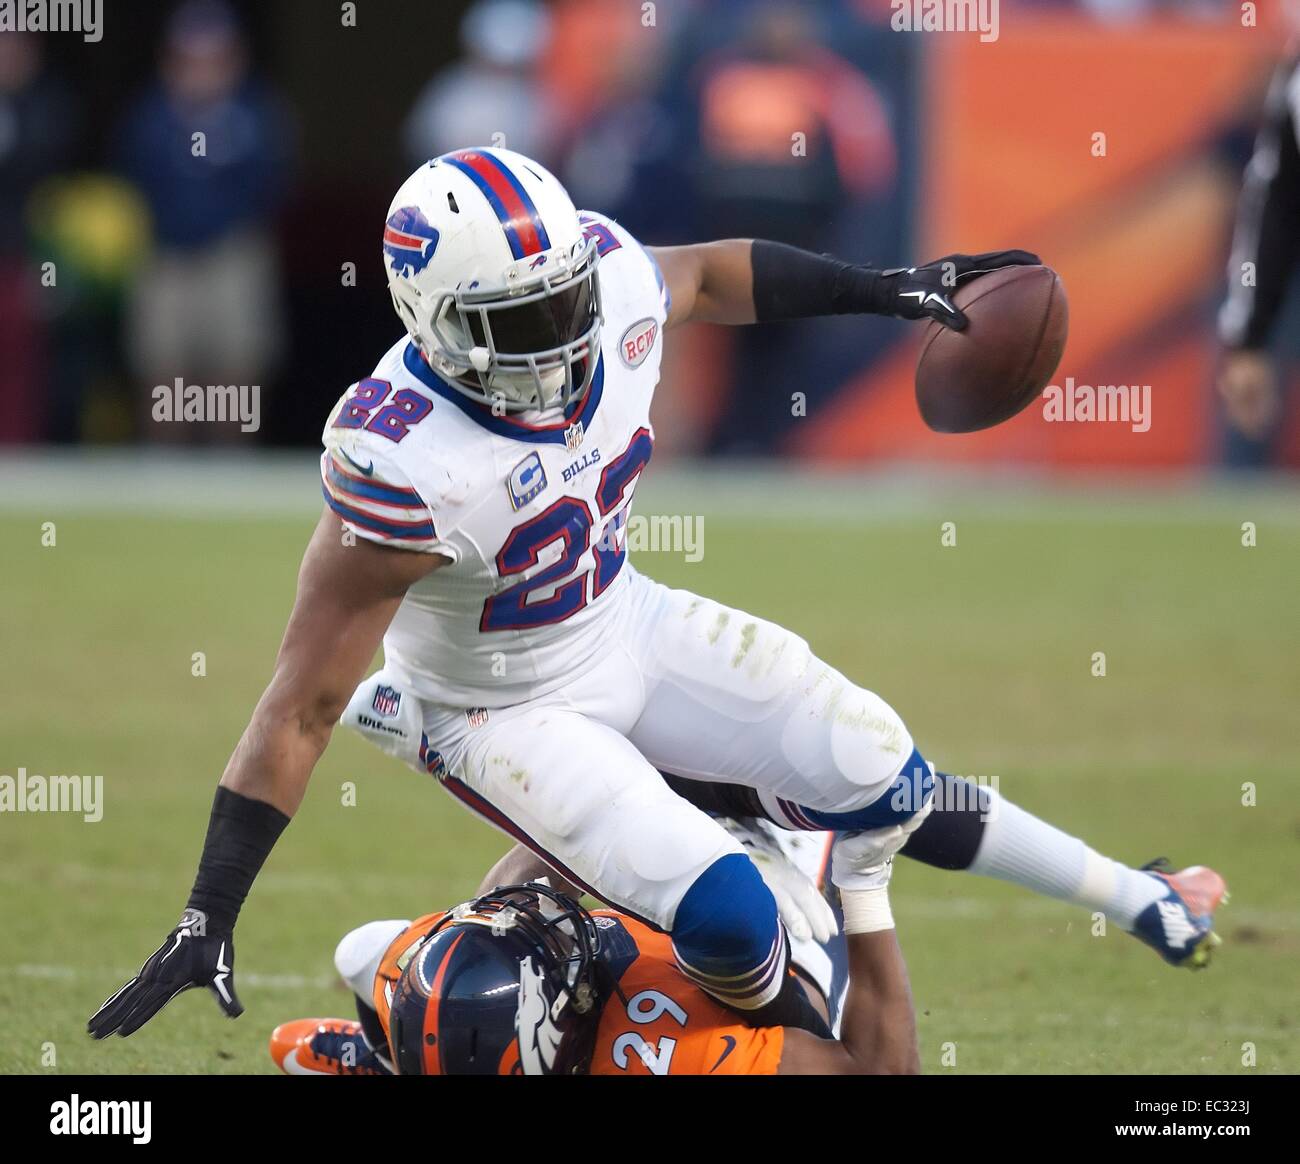 Denver, Colorado, USA. 7th Dec, 2014. Bills RB FRED JACKSON, center, runs for yardage as he tackled by Broncos CB BRADLEY ROBY, bottom, during the 2nd. Half at Sports Authority Field at Mile High Sunday afternoon. The Broncos beat the Bills 24-17. © Hector Acevedo/ZUMA Wire/Alamy Live News Stock Photo